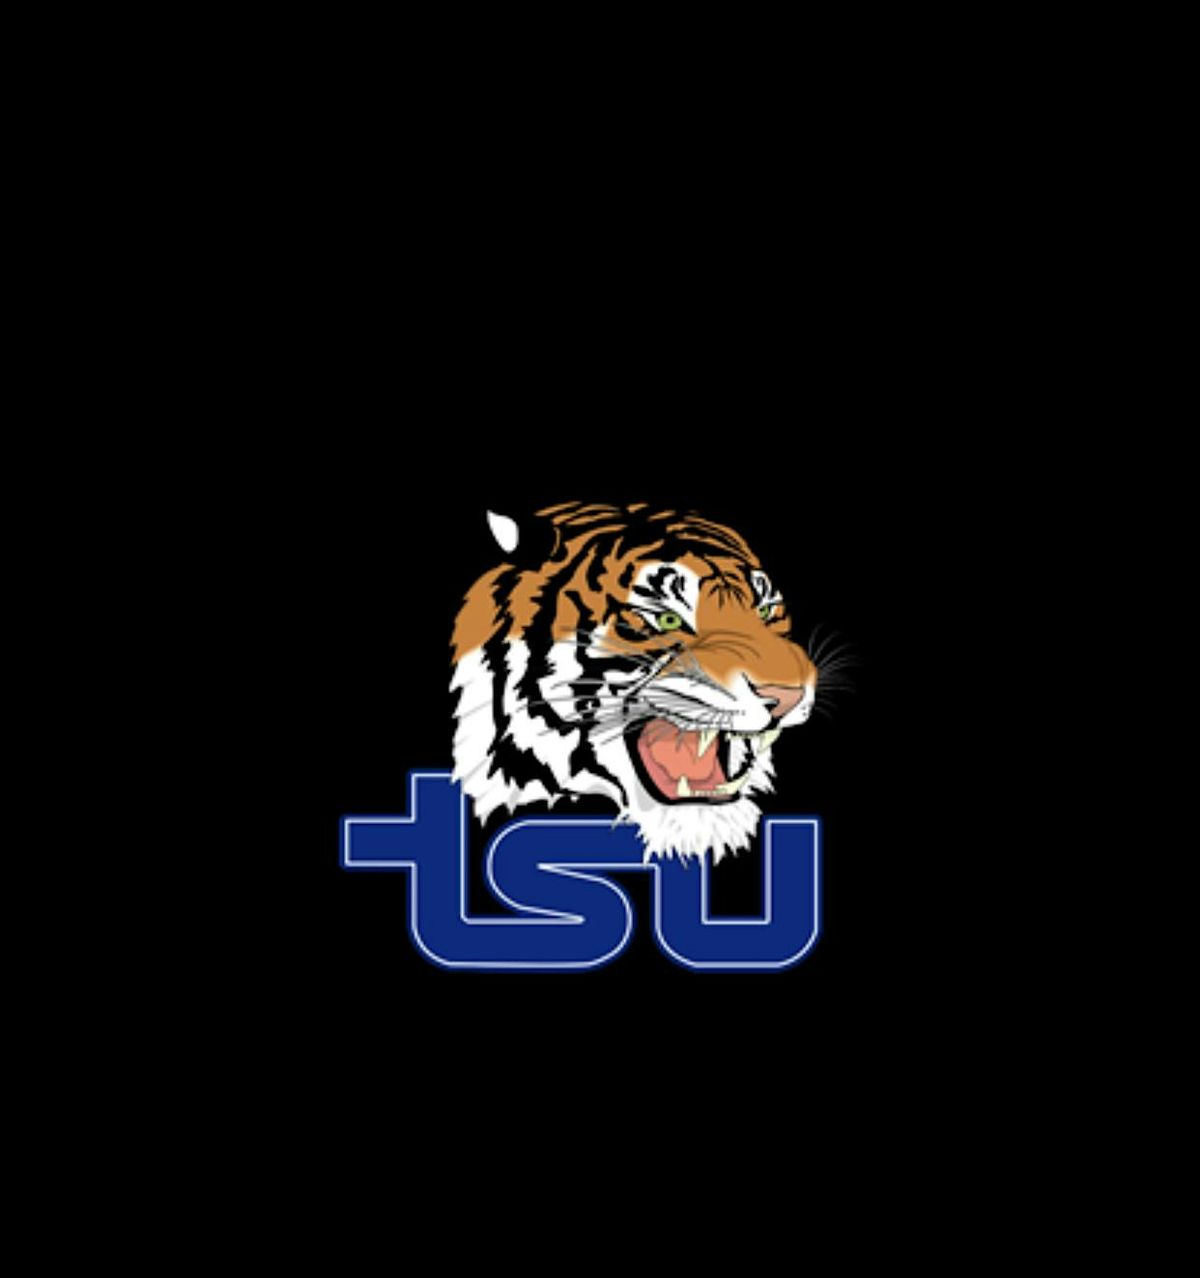 TSU  Greater Indianapolis Alumni Chapter Scholarship Day Party